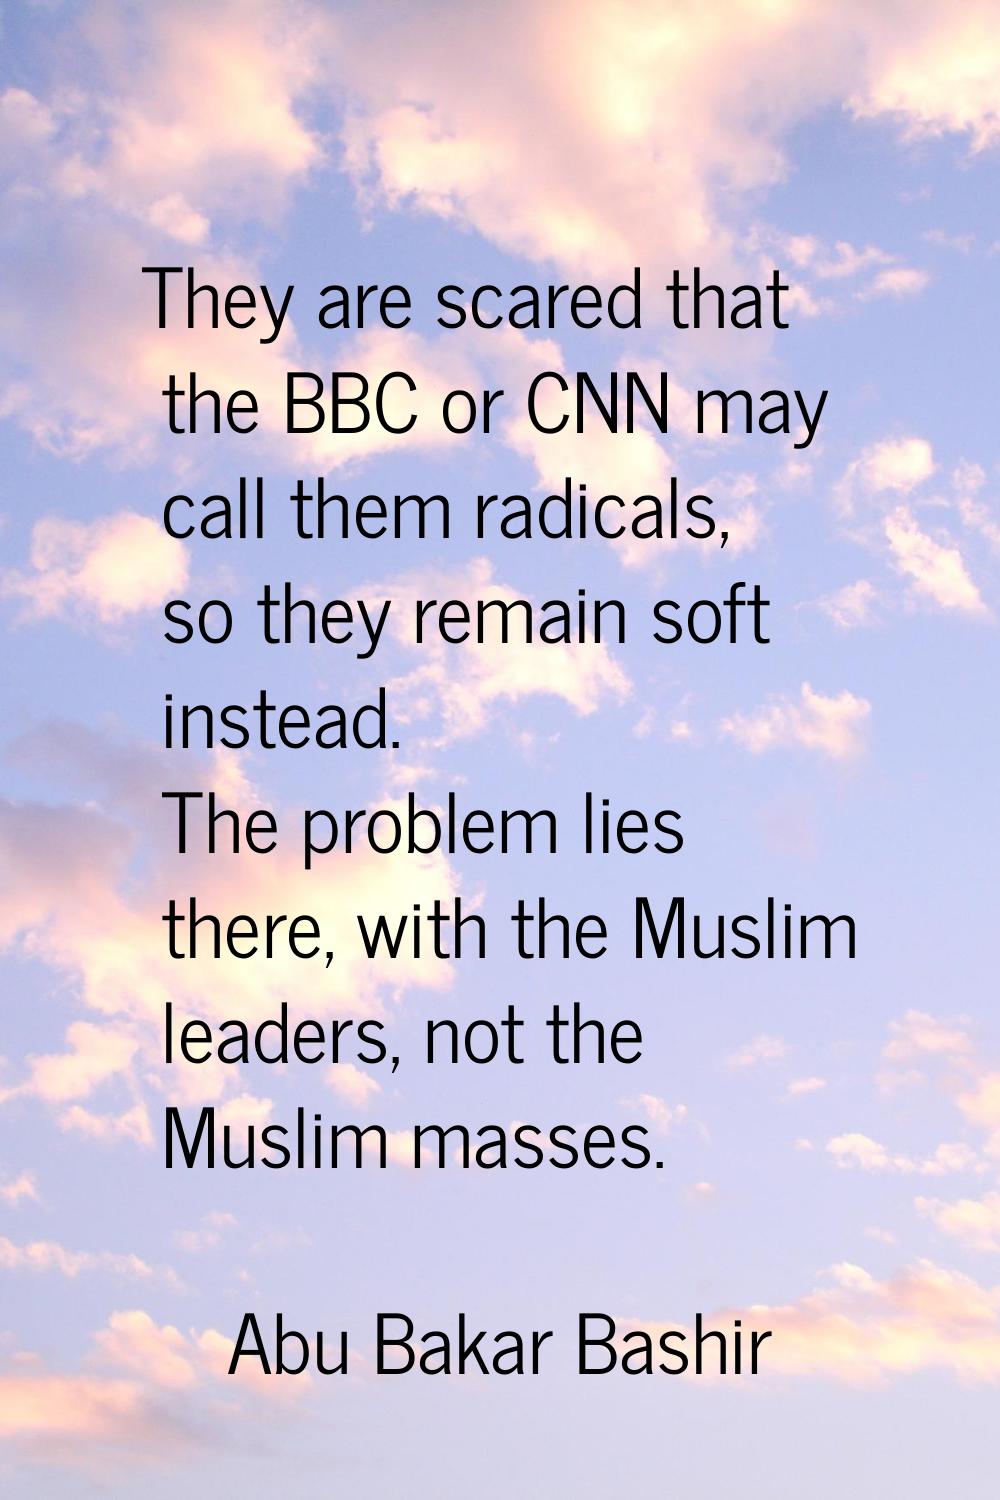 They are scared that the BBC or CNN may call them radicals, so they remain soft instead. The proble